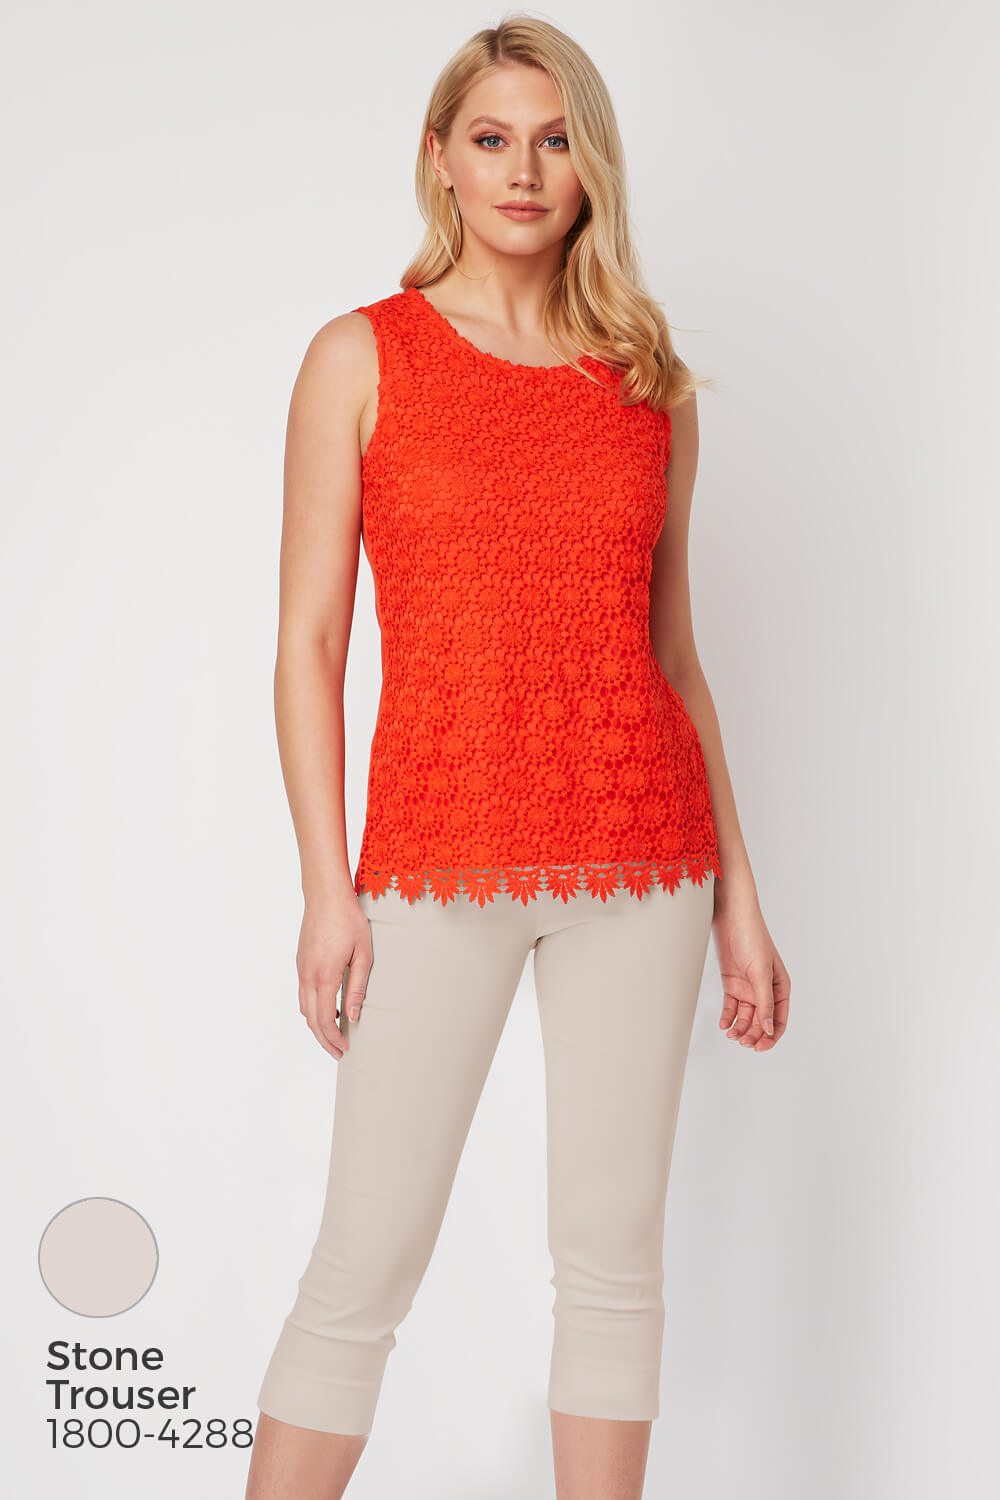 ORANGE Lace Jersey Top, Image 8 of 9